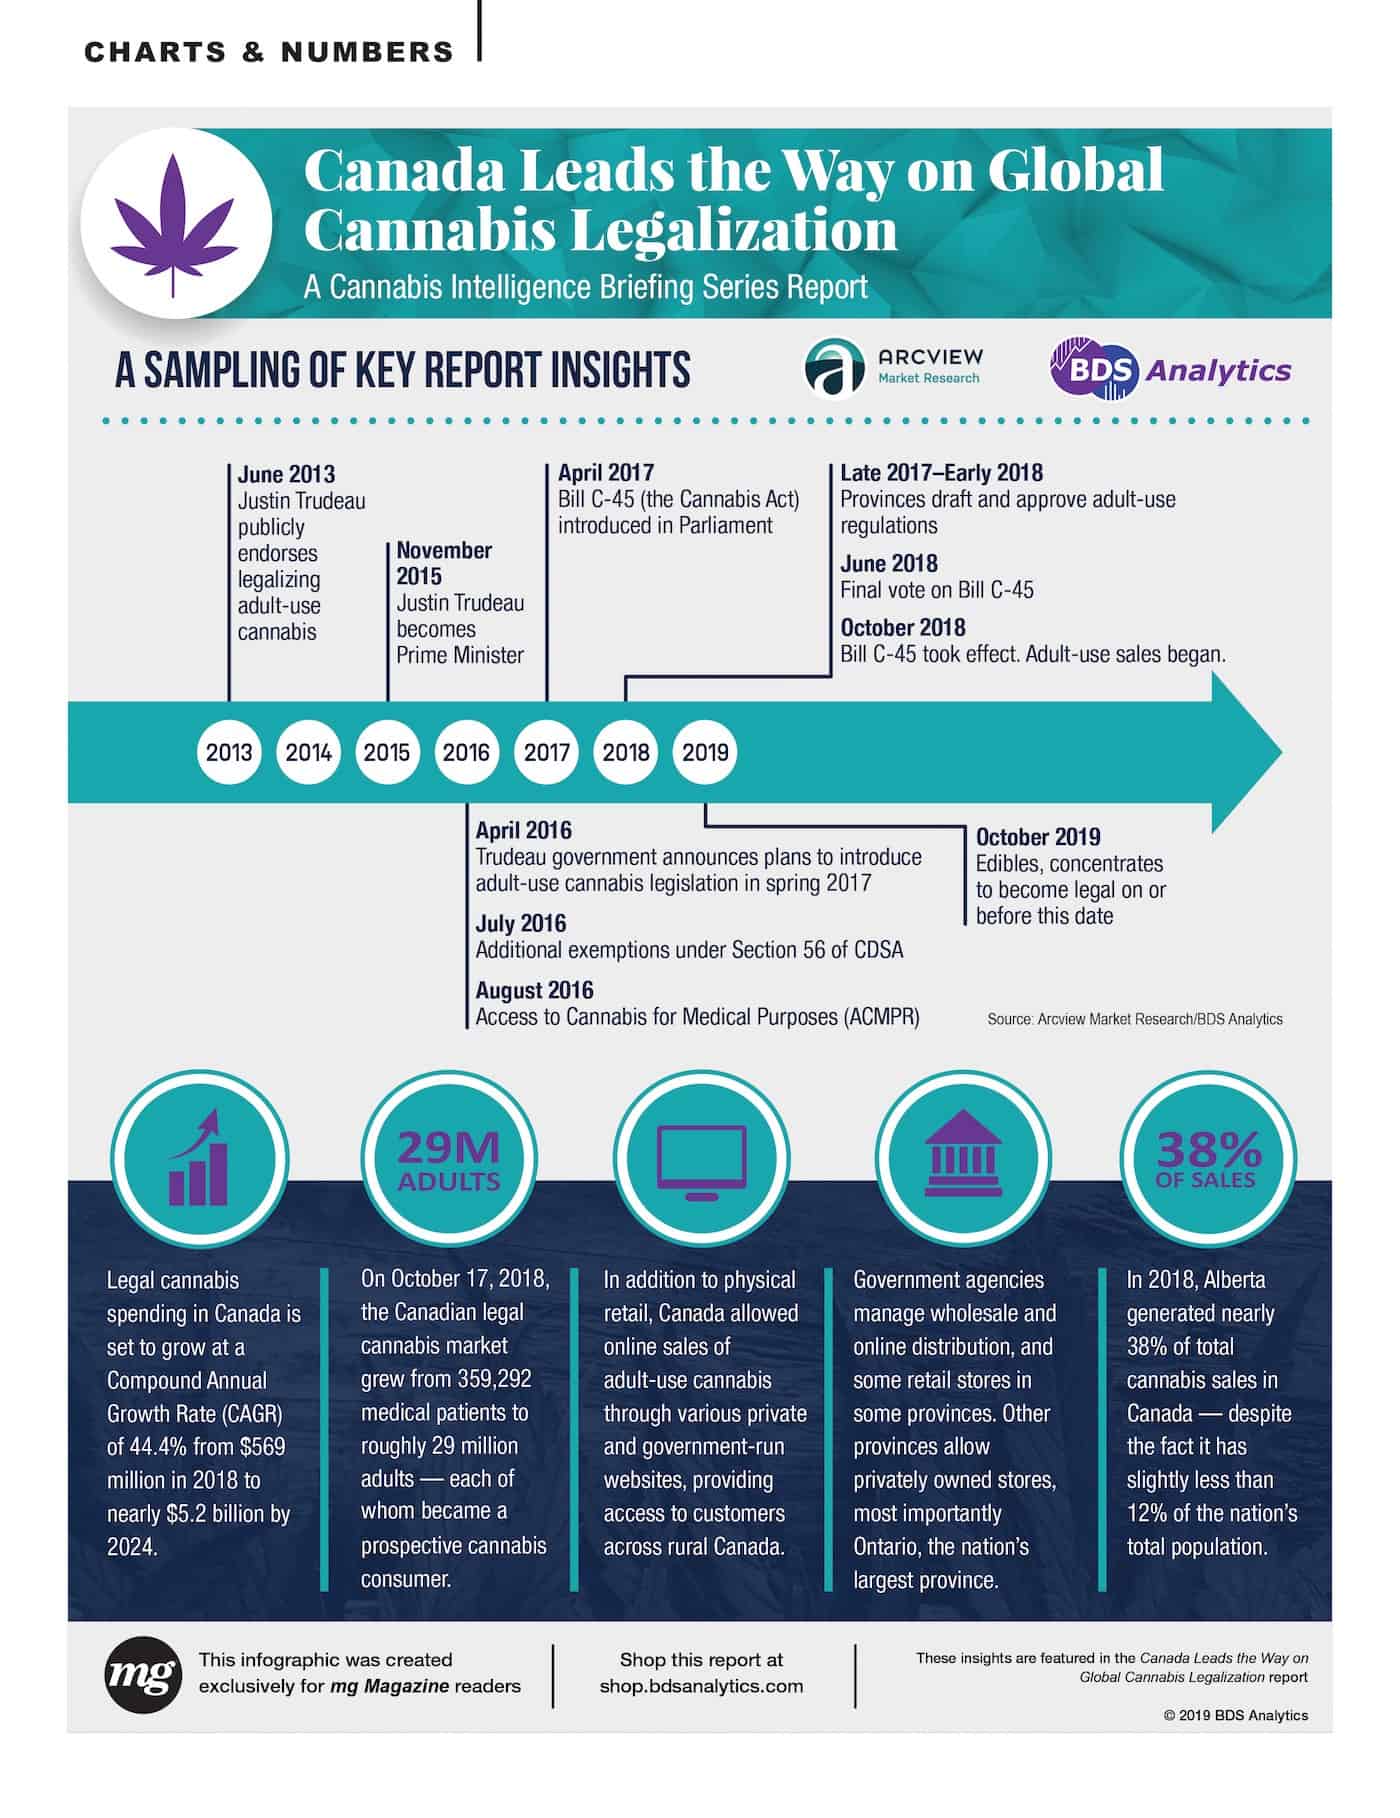 Canadian Cannabis Legalization Infographic by BDS Analytics